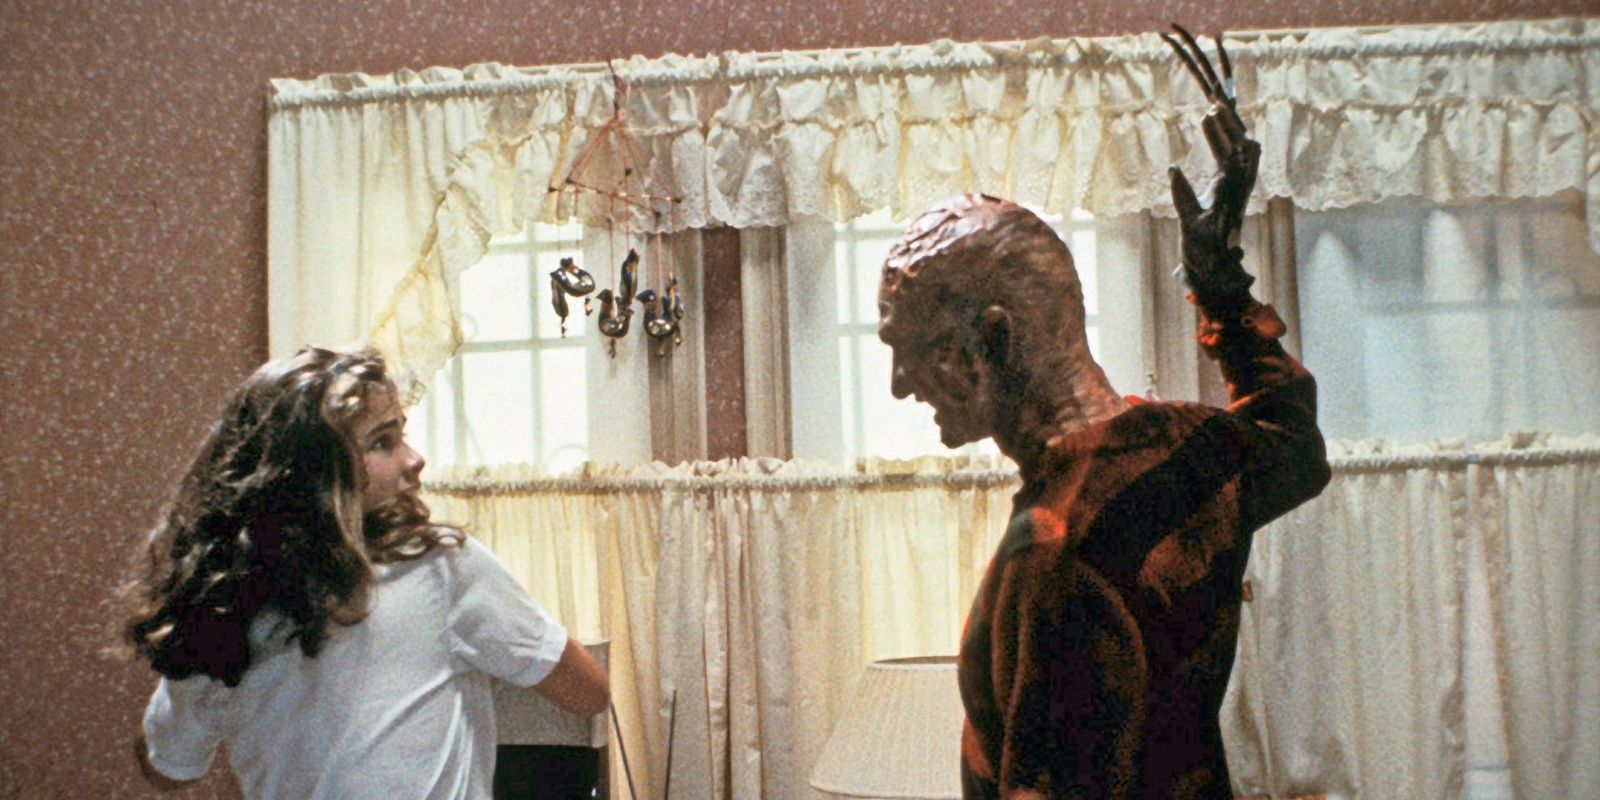 Freddy attacks his victim in A Nightmare on Elm Street